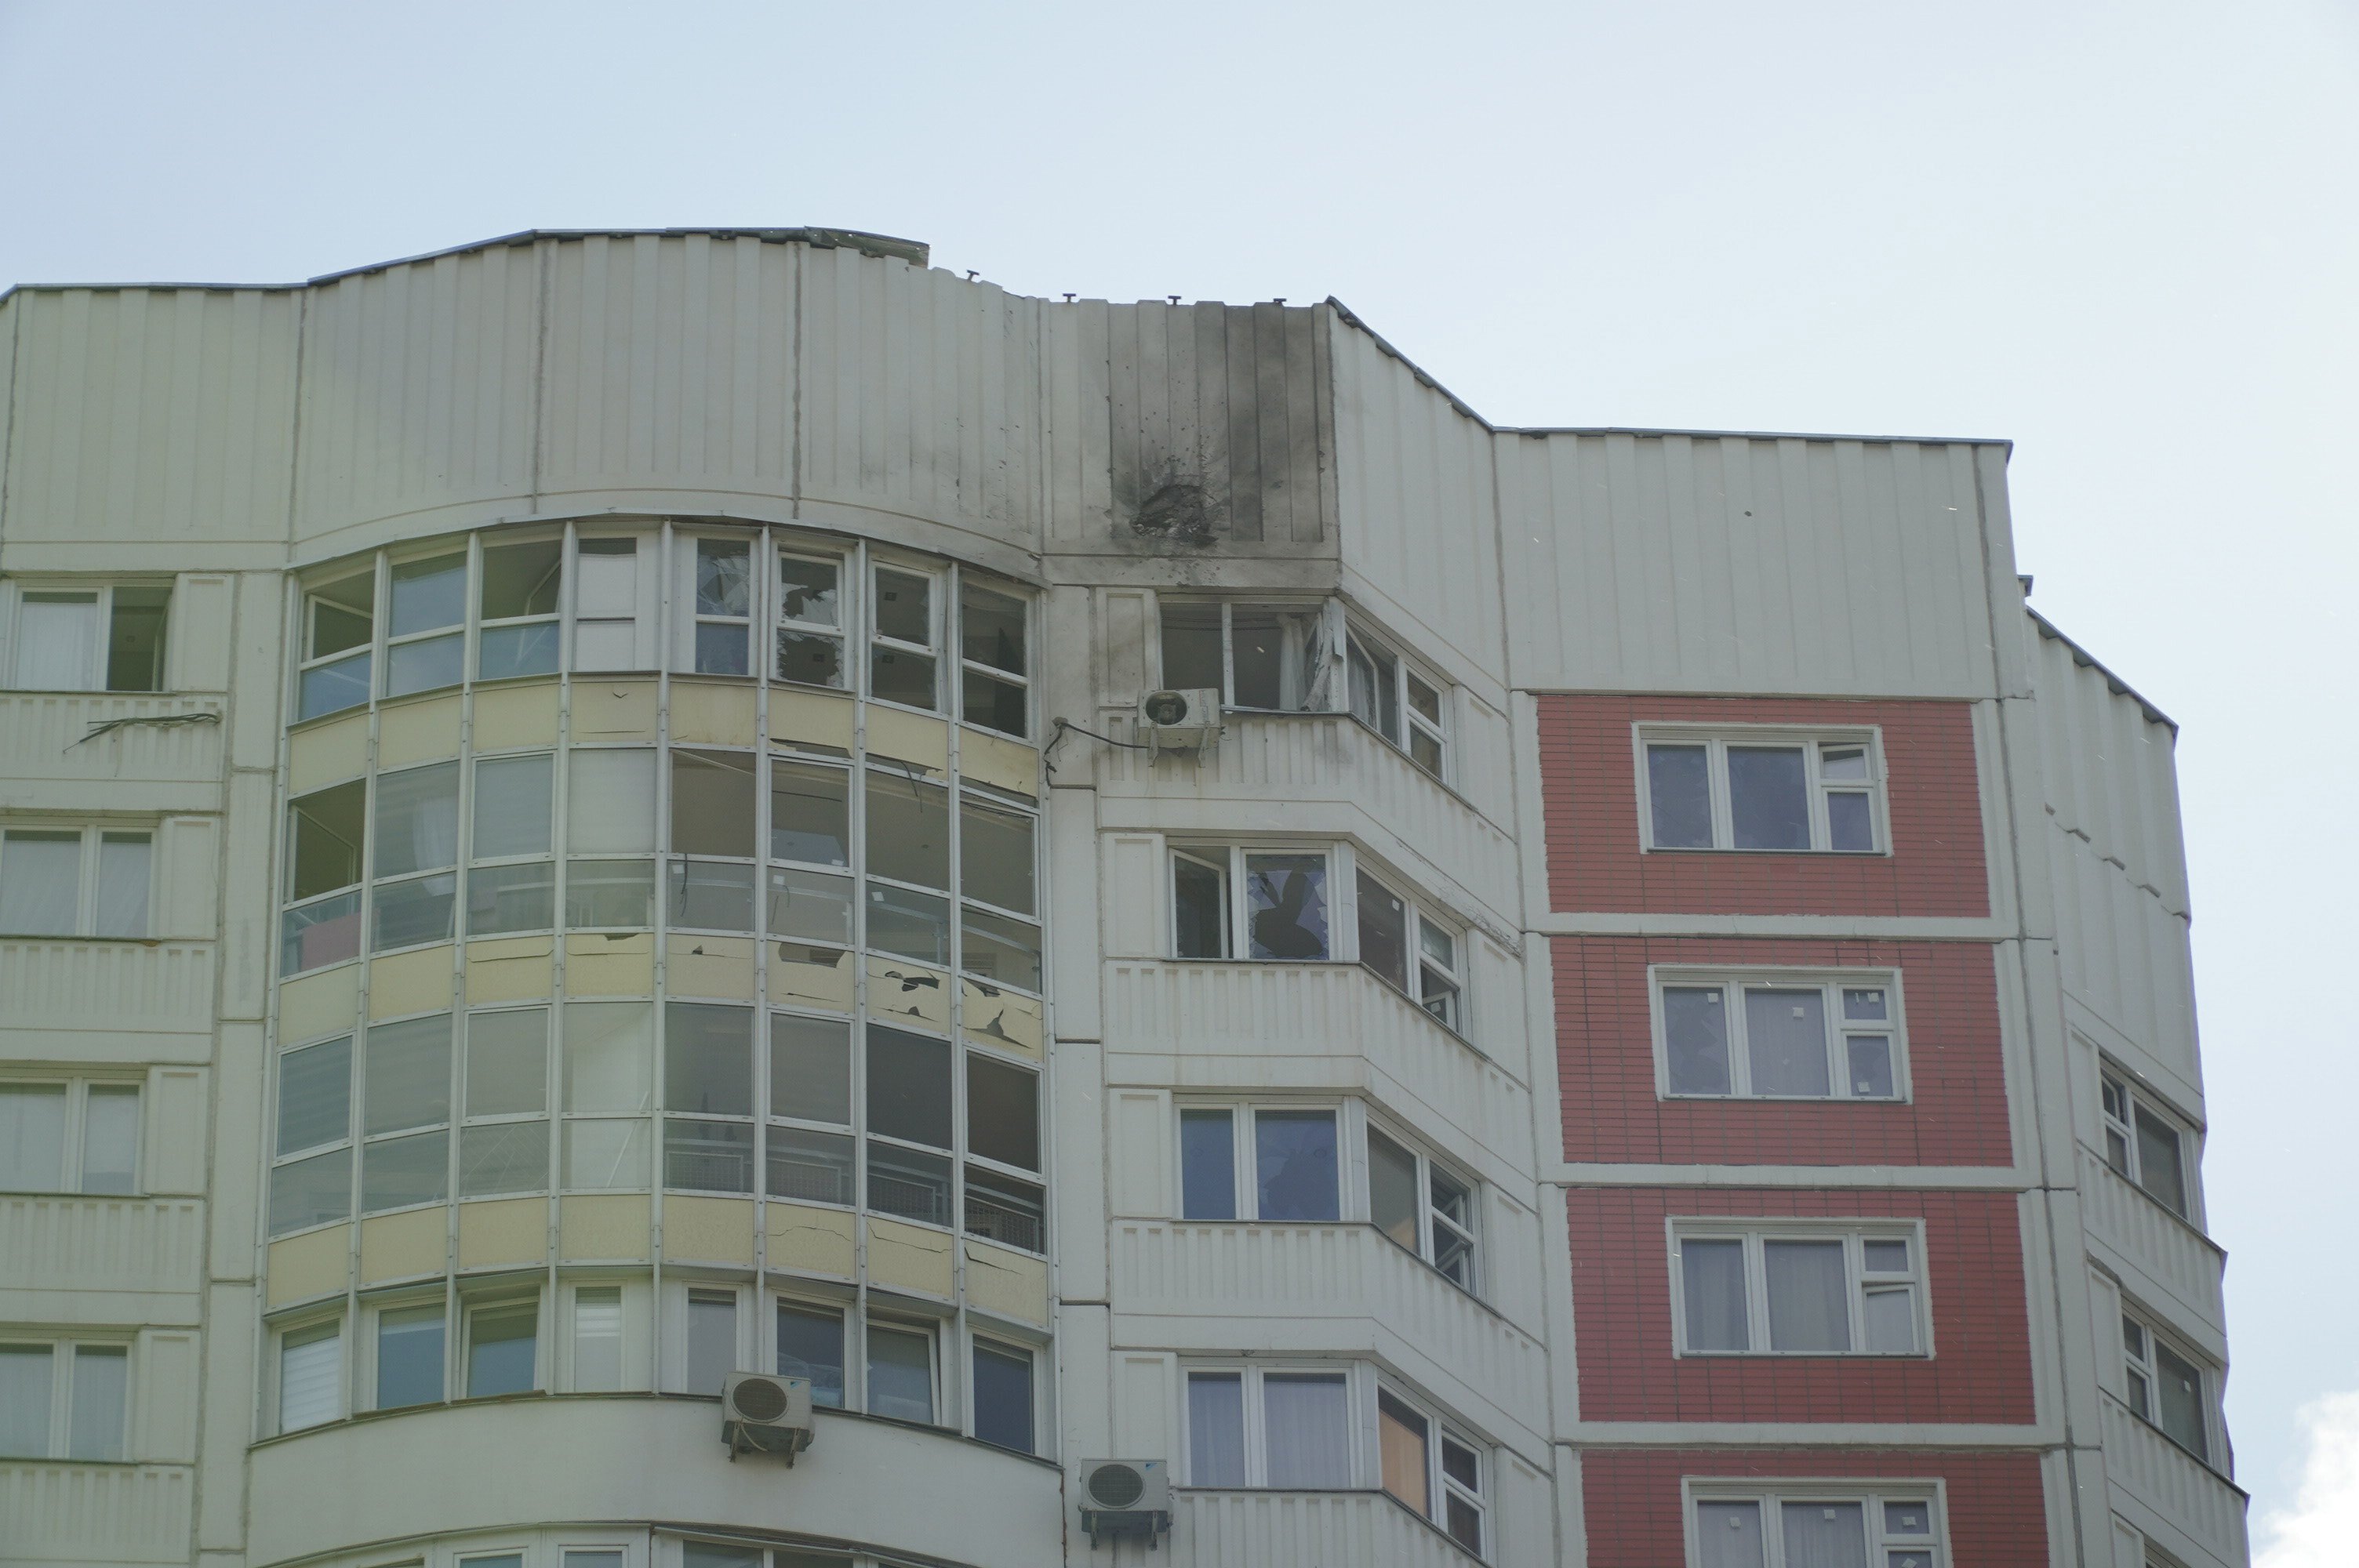 Russia’s home front: a damaged Moscow apartment building after the drone attack on May 30. PHOTO:...